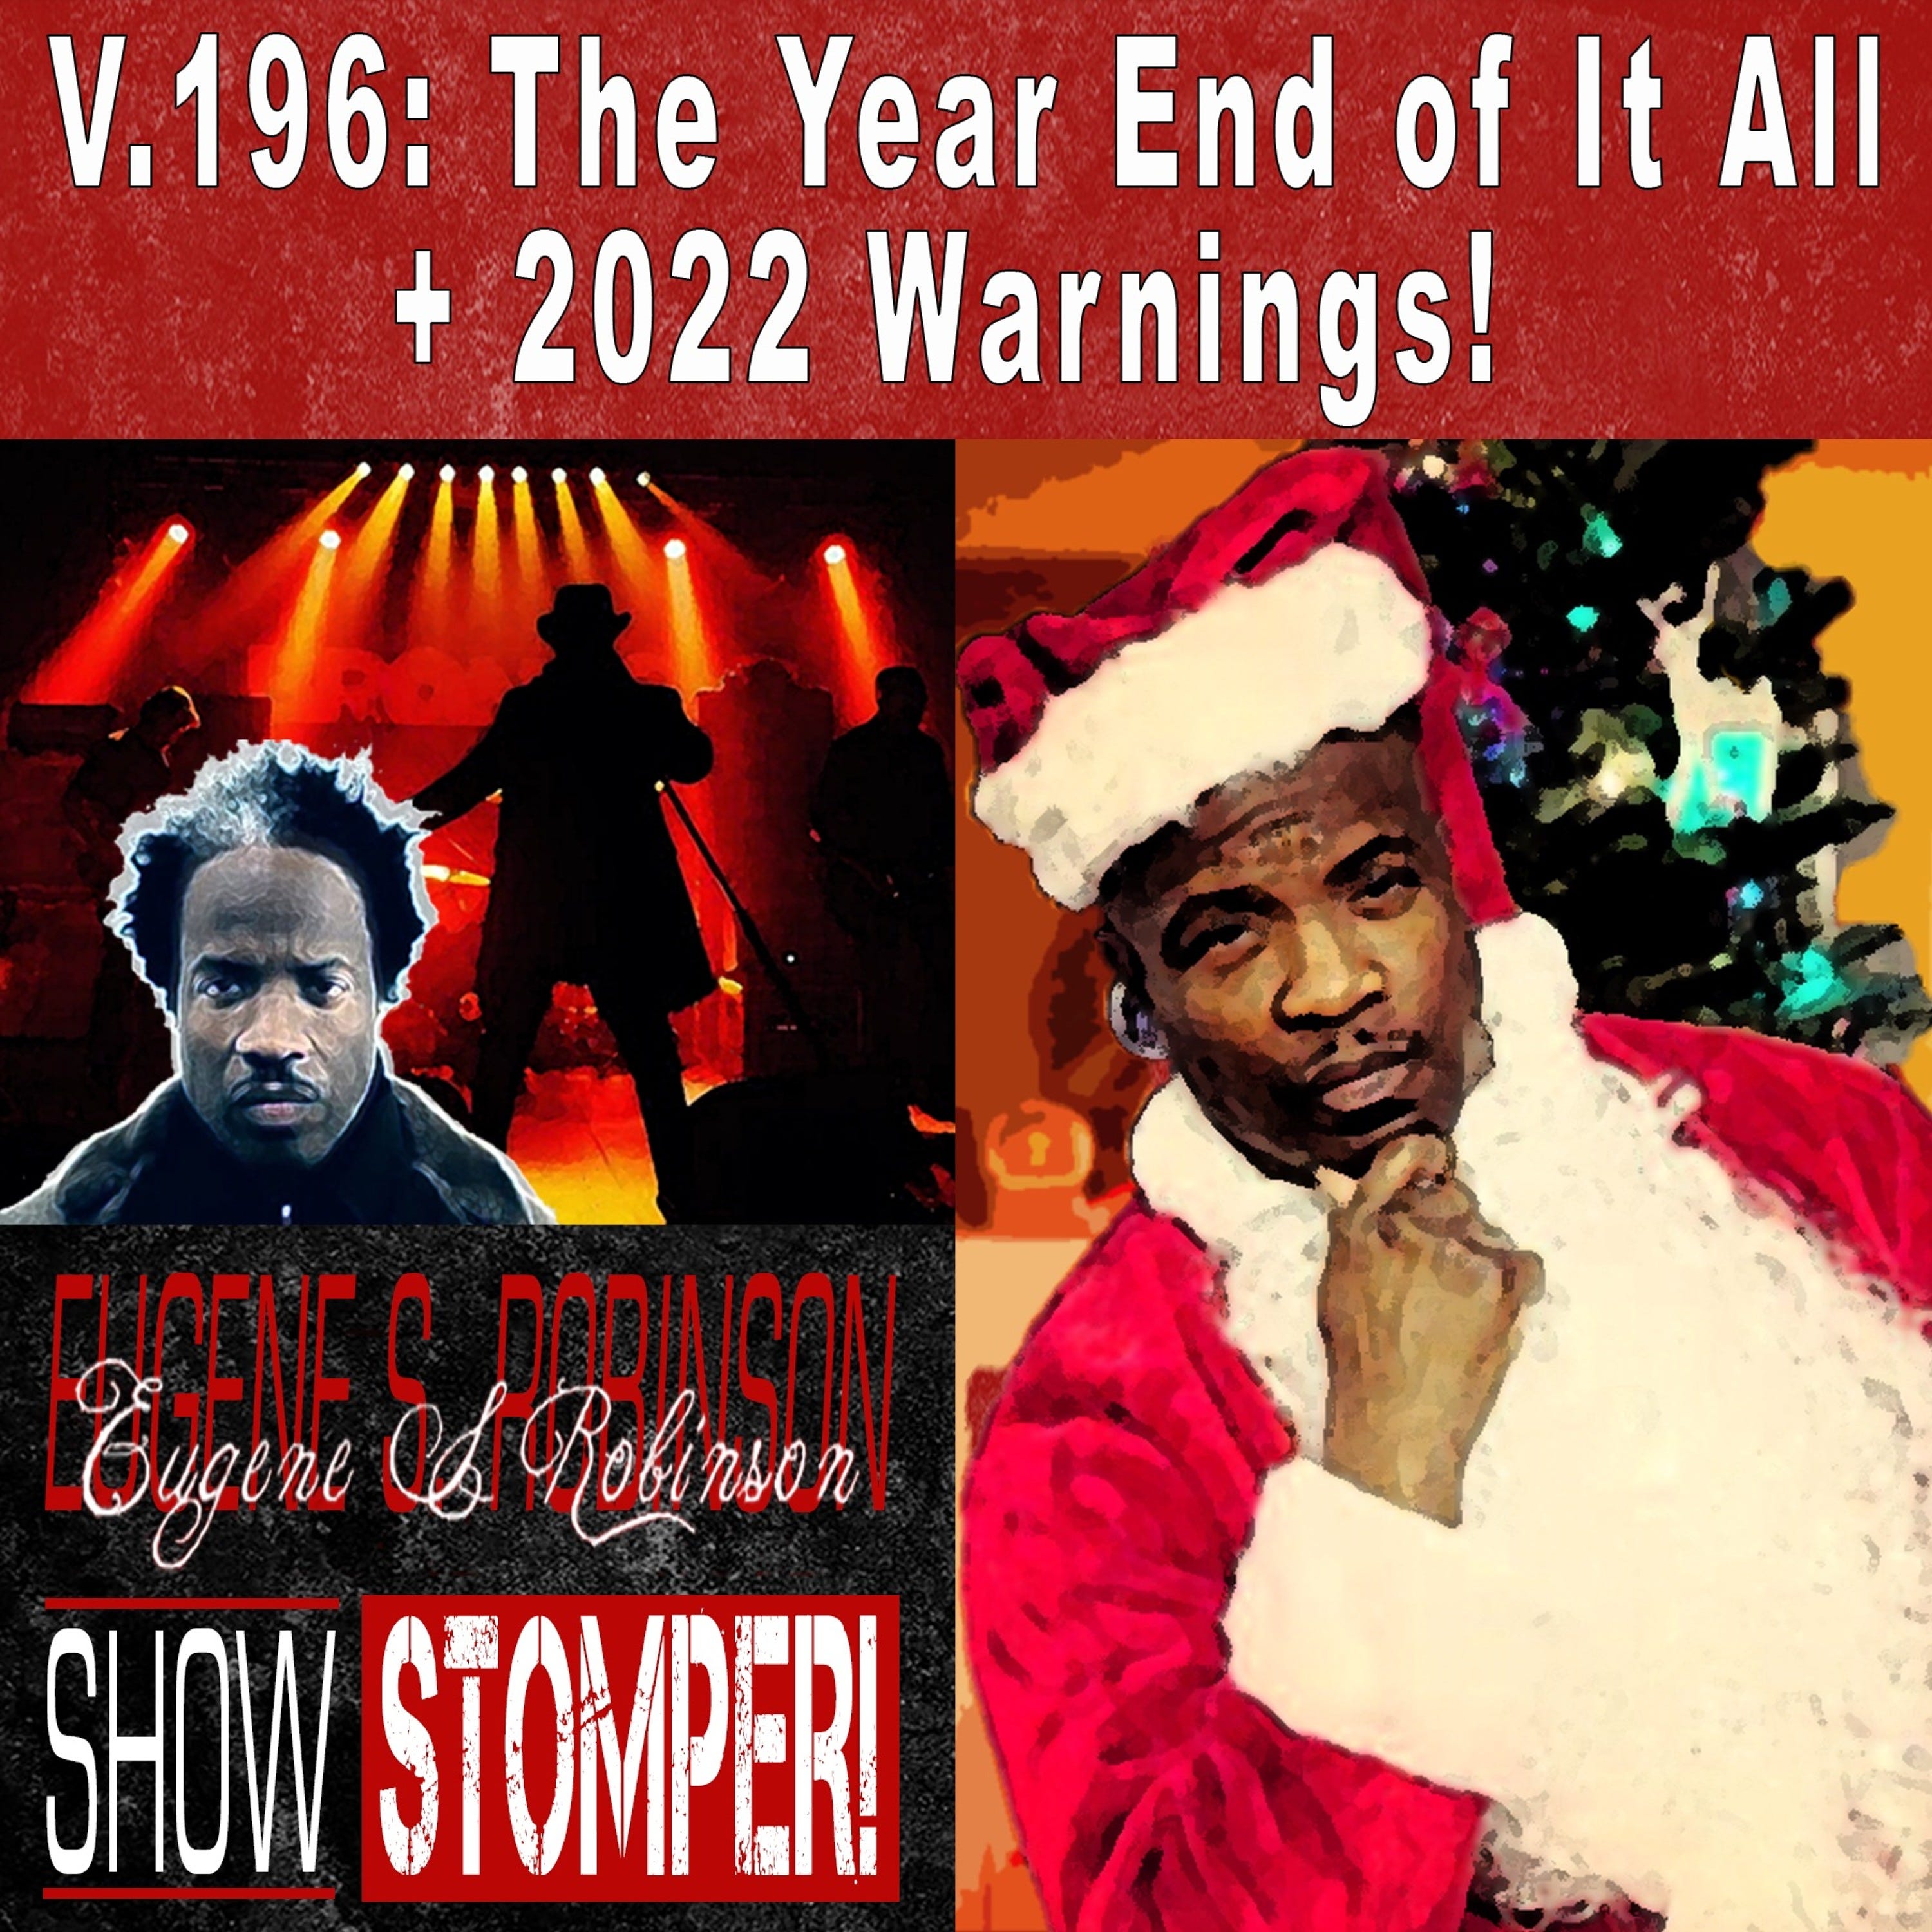 V.196 The Year End Of It All + 2022 Warnings! On The Eugene S. Robinson Show Stomper!